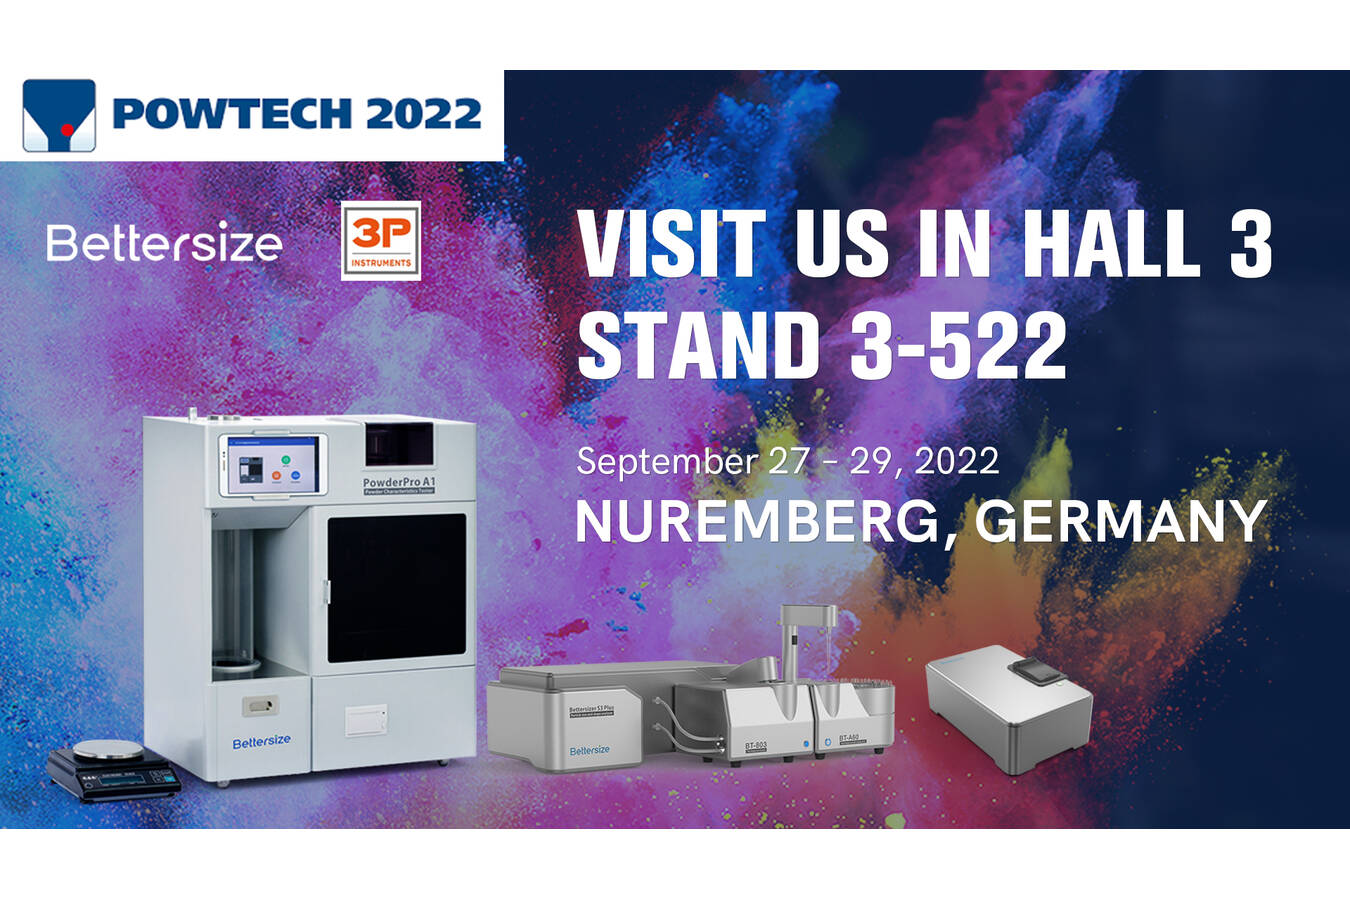 3P Instruments will be at the Powtech in Nuremberg Visit our booth 522 in hall 3 and consult our experts about the characterization of particles, powders and pores.